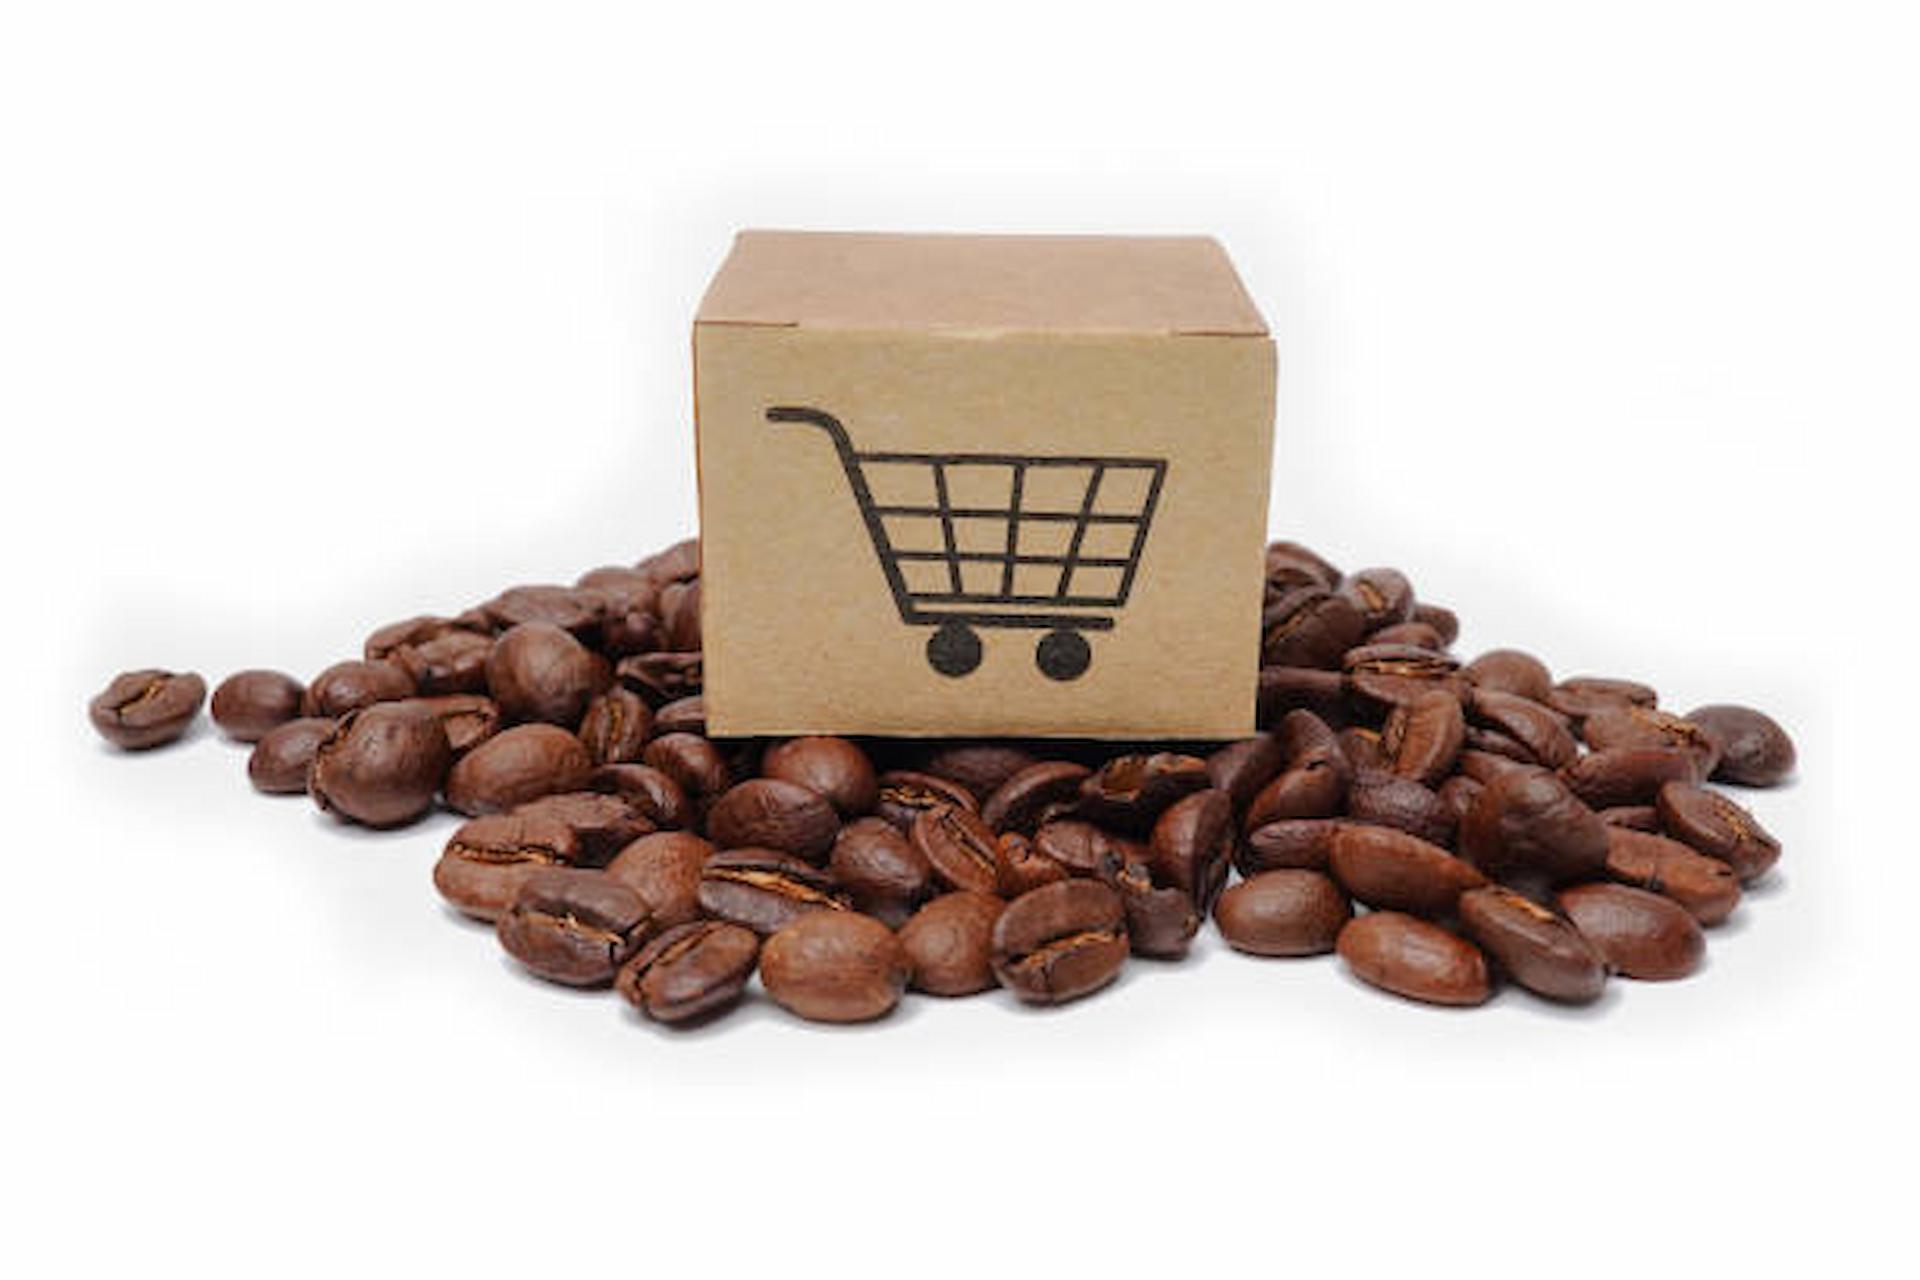 Where Is The Best Place To Buy Coffee Online?